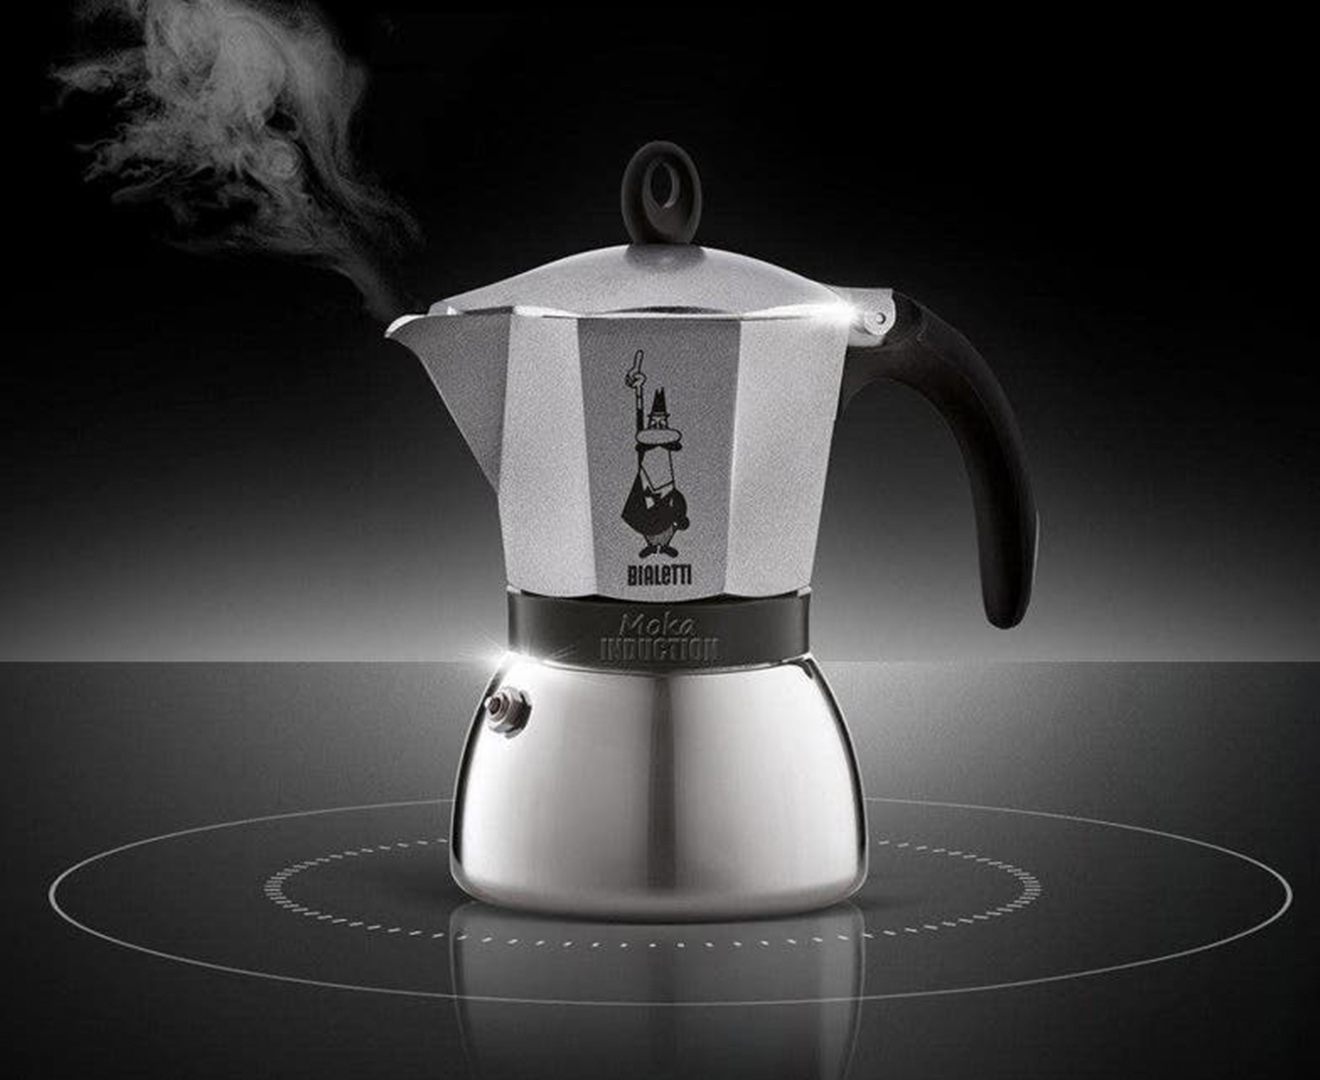 bialetti-3-cup-moka-induction-stovetop-espresso-maker-catch-co-nz